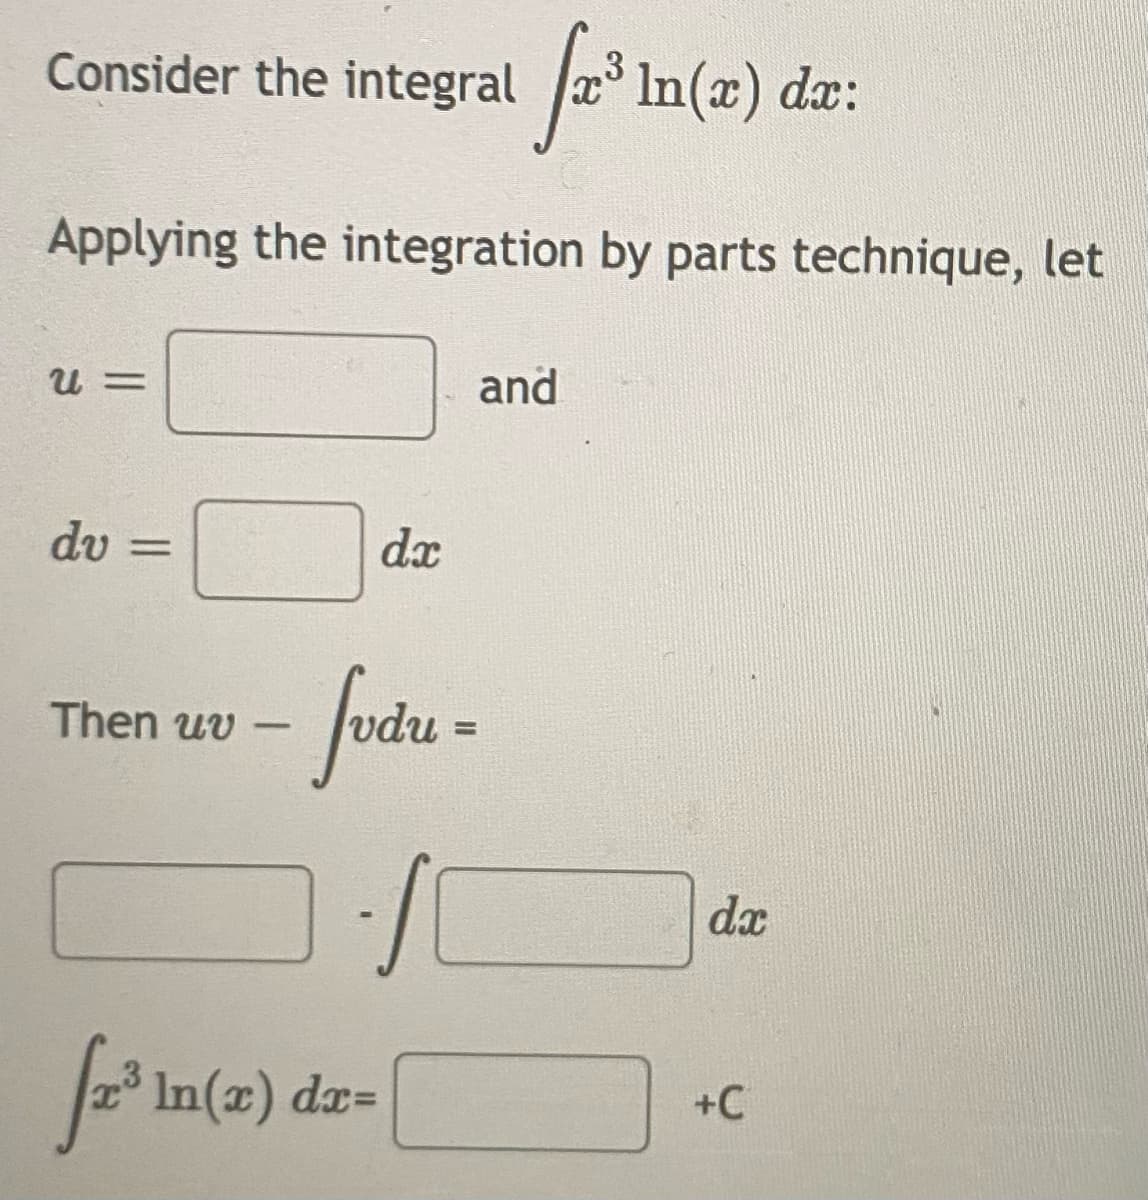 Consider the integral
a° In(x) dæ:
3
Applying the integration by parts technique, let
u =
and
dv
dx
fod -
Then uv –
%3D
da
2° In(x) dx=
+C
